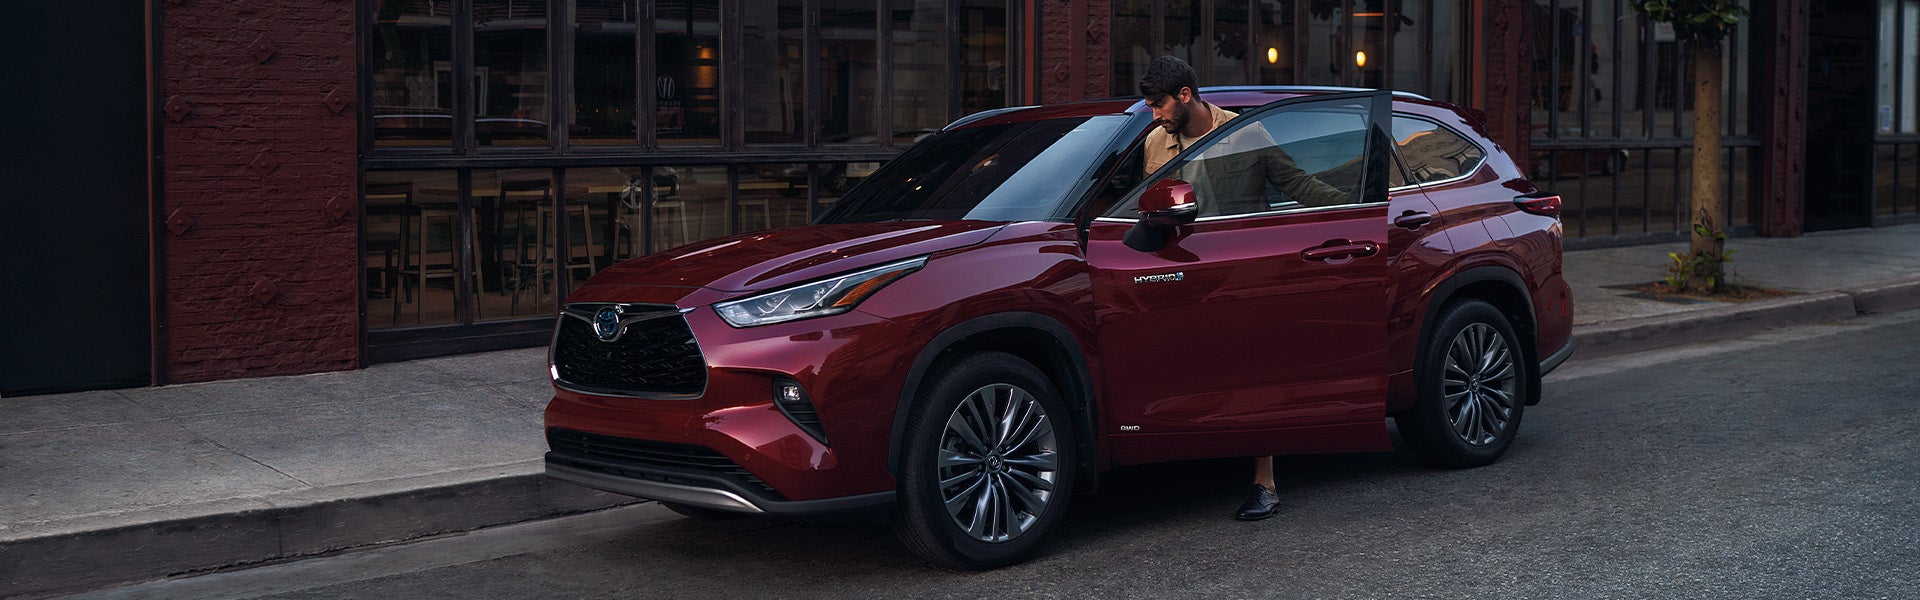 Model Features of the 2022 Toyota Highlander Hybrid at Bennett Toyota | Man Getting Into Driver's Side of Red Highlander Hybrid Street Parked in City